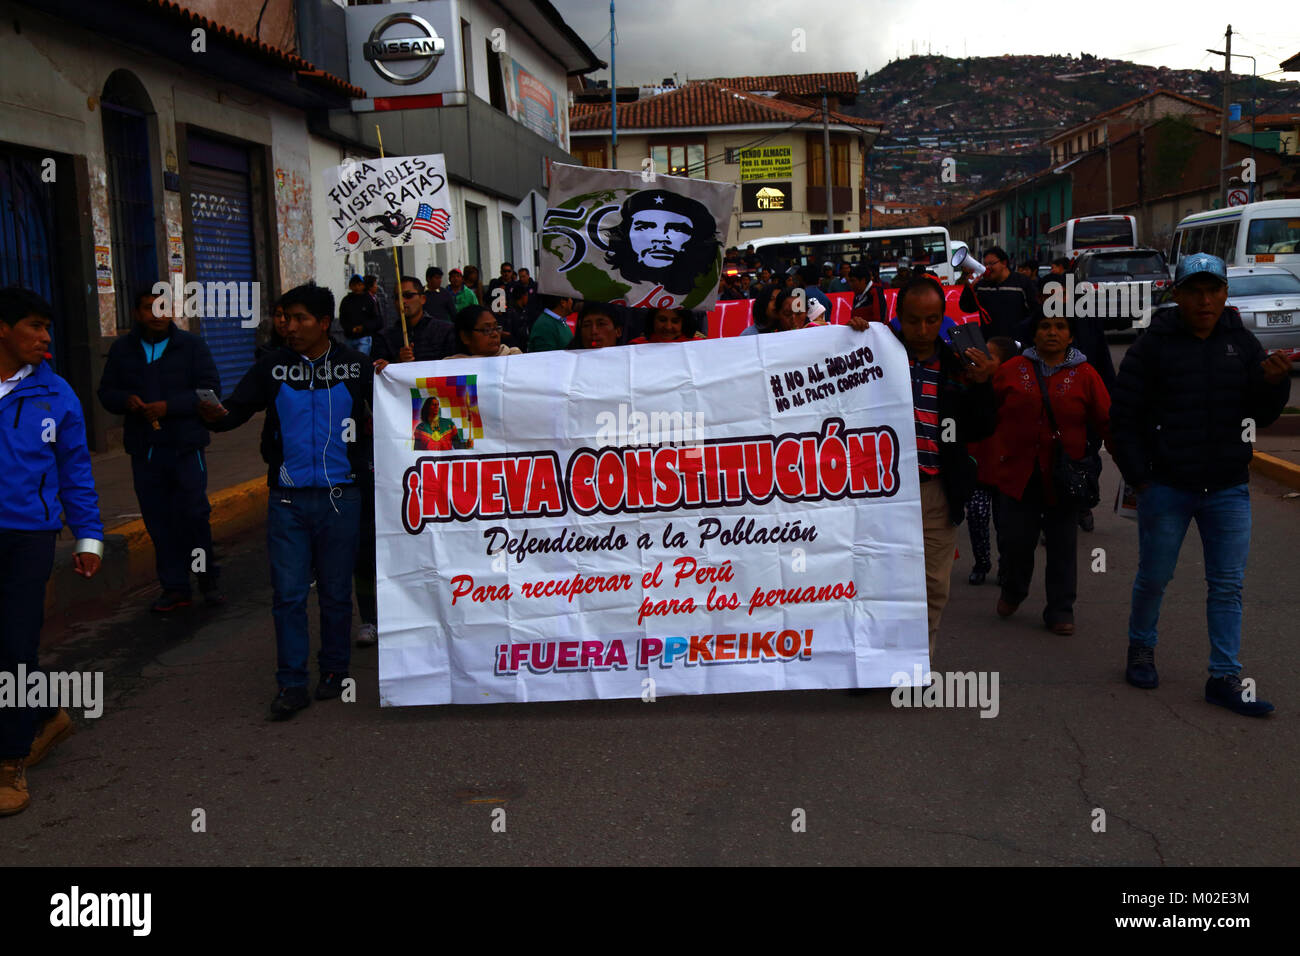 Protesters carry a banner demanding a new constitution during a protest march against corruption, Cusco, Peru Stock Photo